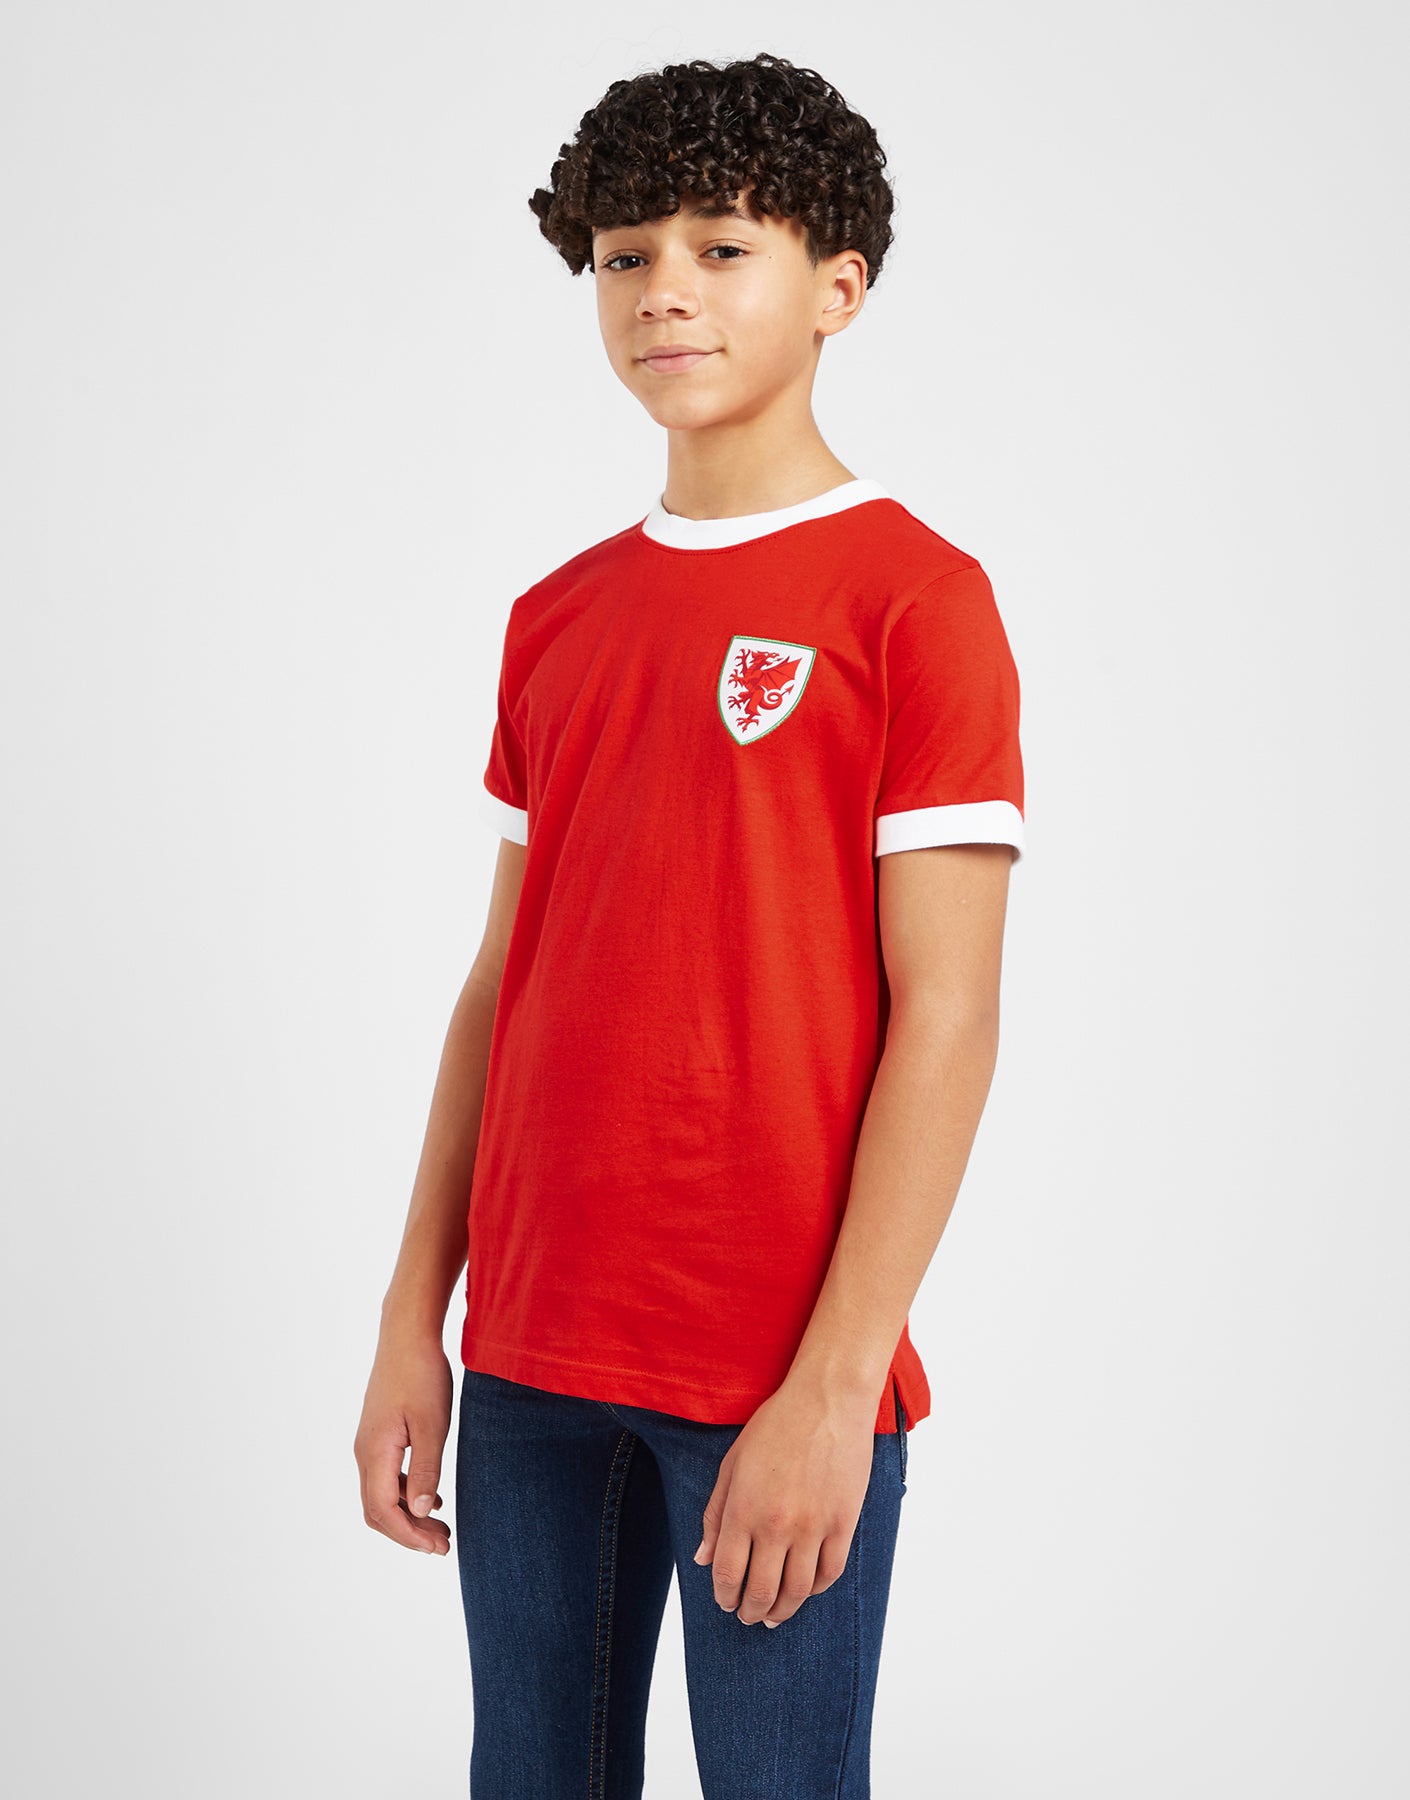 Official Team Wales Kids Ringer T-Shirt - Red